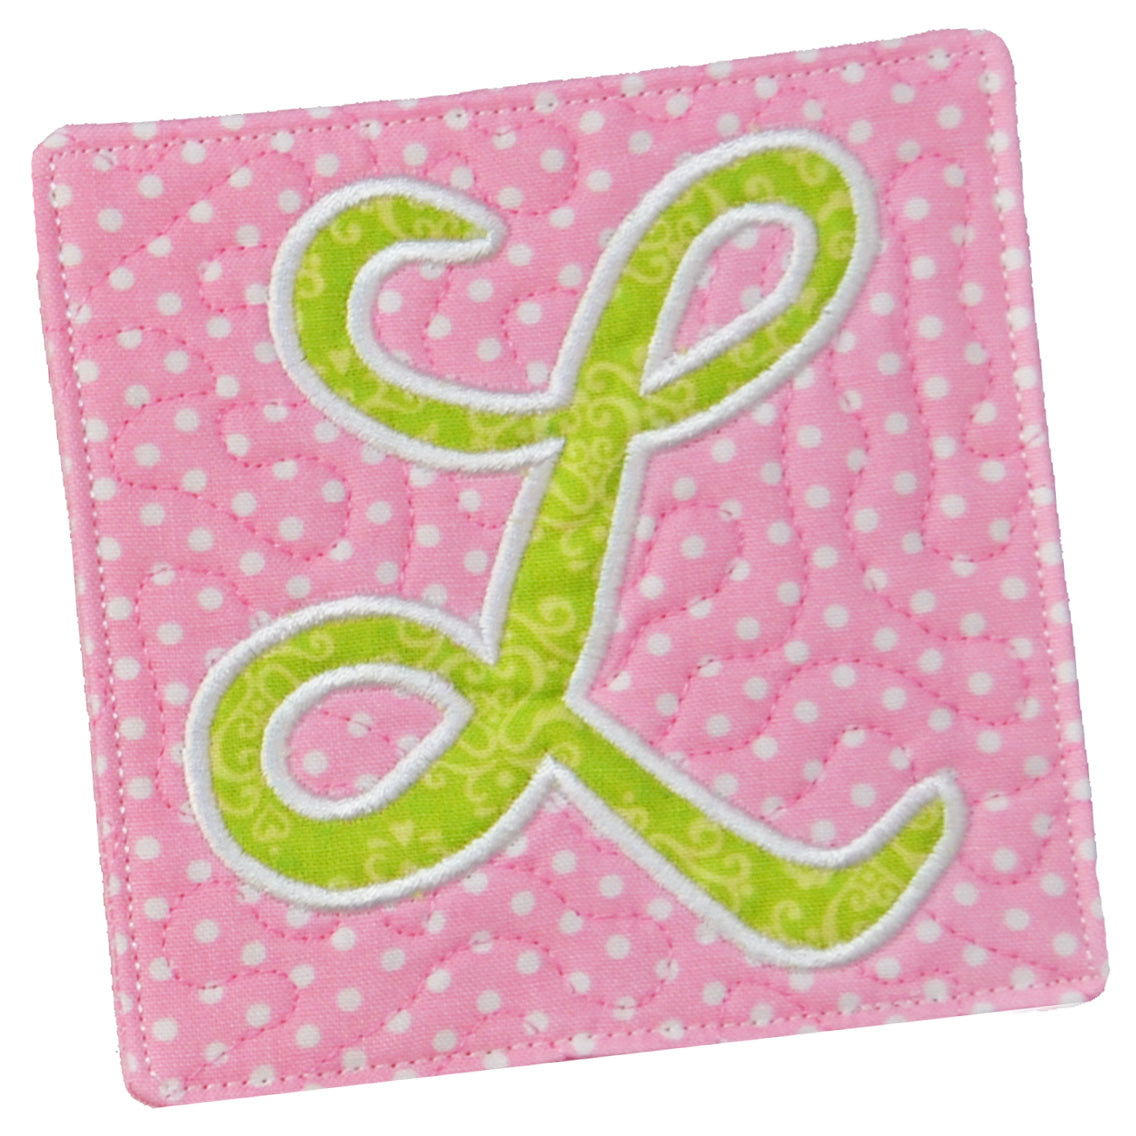 monogrammed applique coaster in the hoop embroidery design